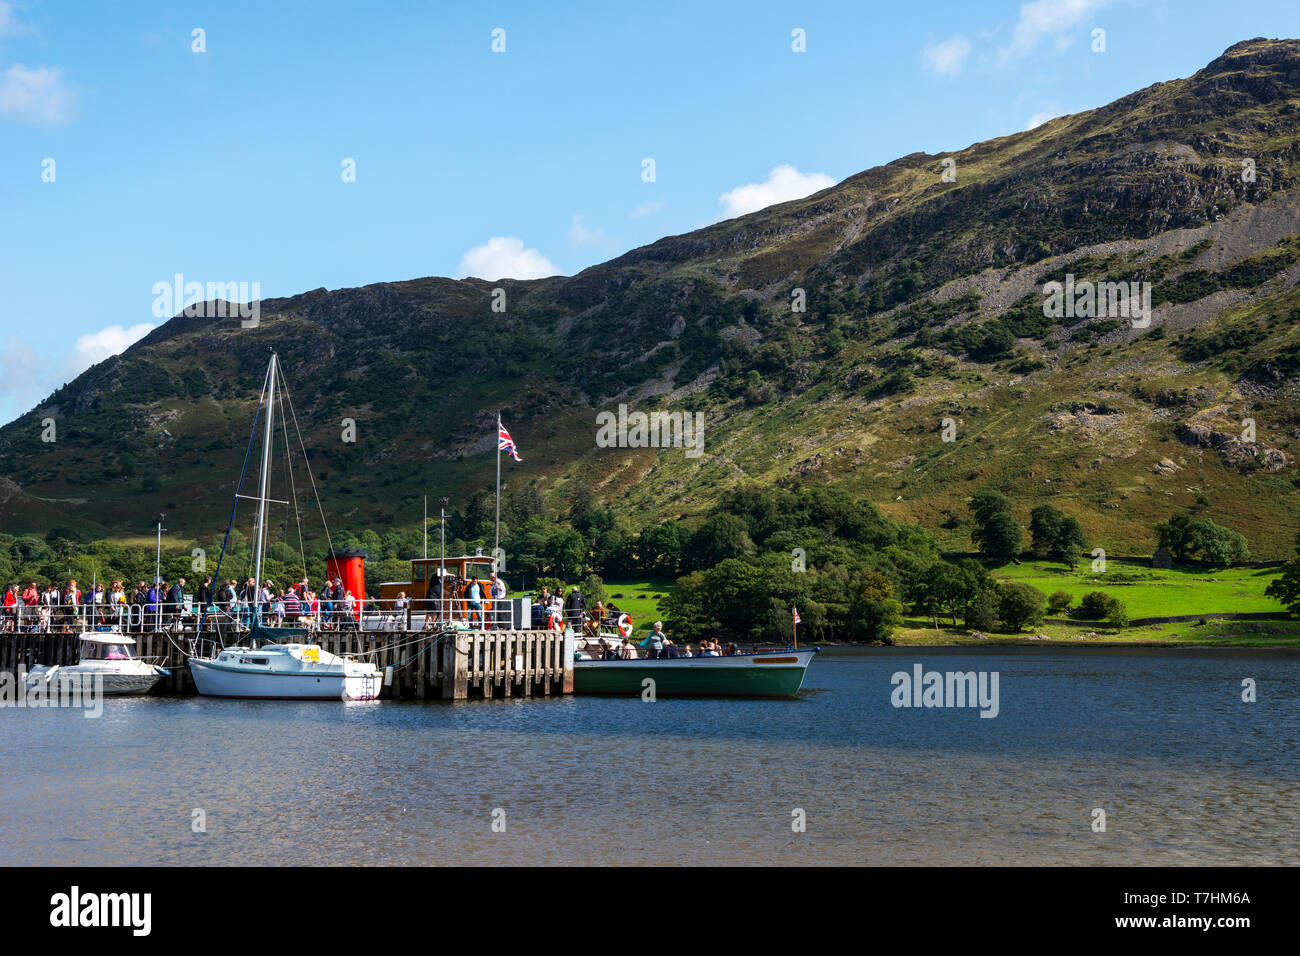 Lake steamer “Lady of the Lake” loading passengers at Glenridding pier on Ullswater in the Lake District National Park, Cumbria, England, UK Stock Photo